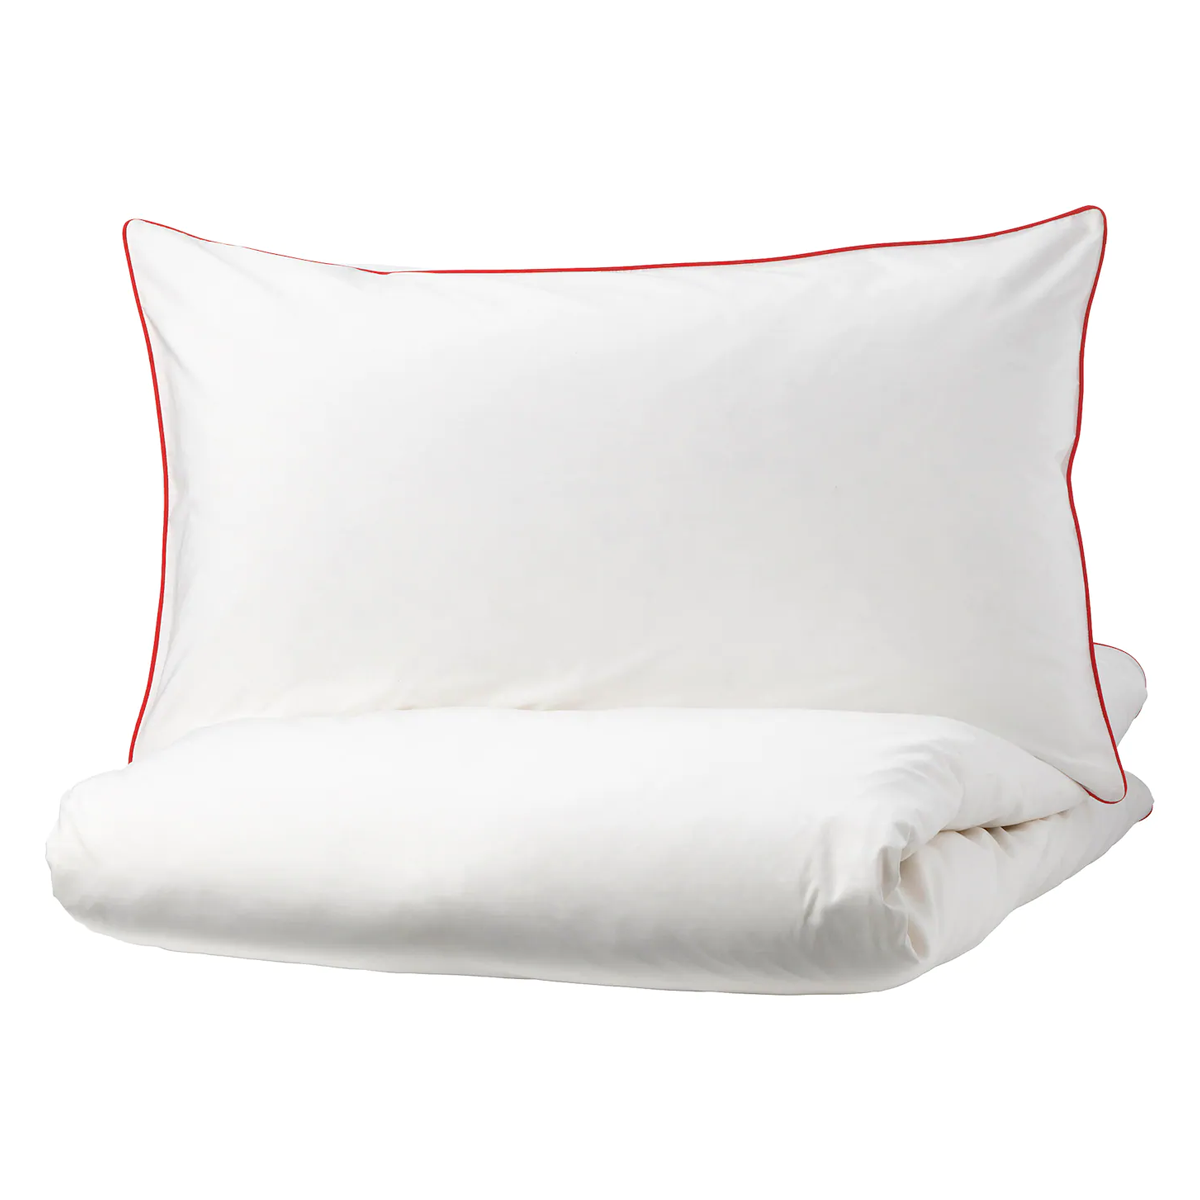 Quilt cover and pillowcase, White & Red 150x200/50x80 cm - KUNGSBLOMMA